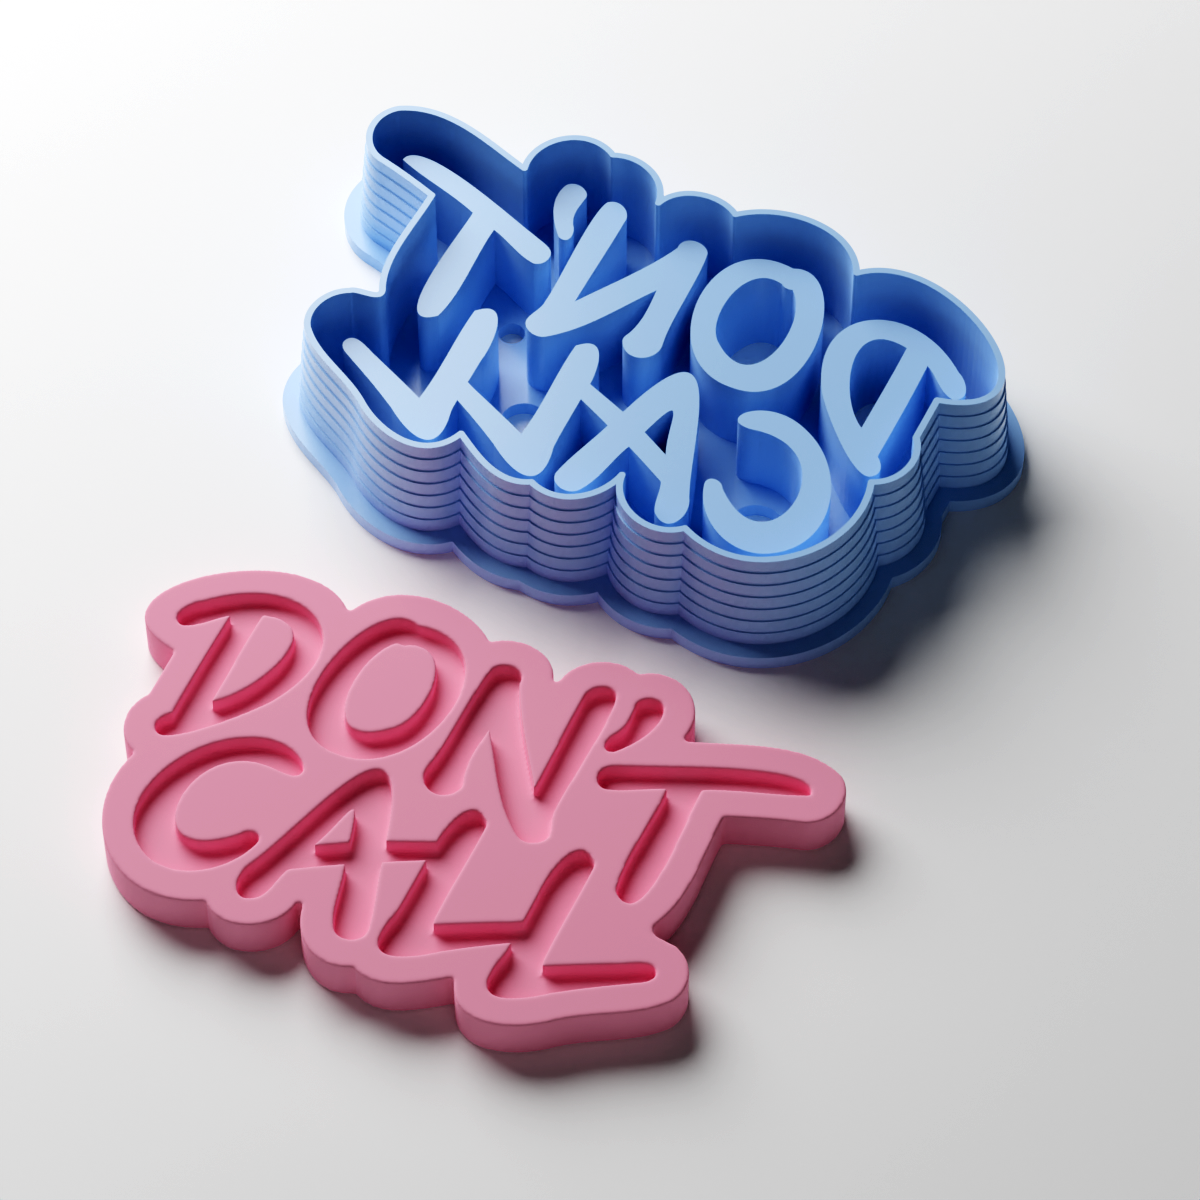 Don't Call - 'It Girl' Trend Clay Cutter